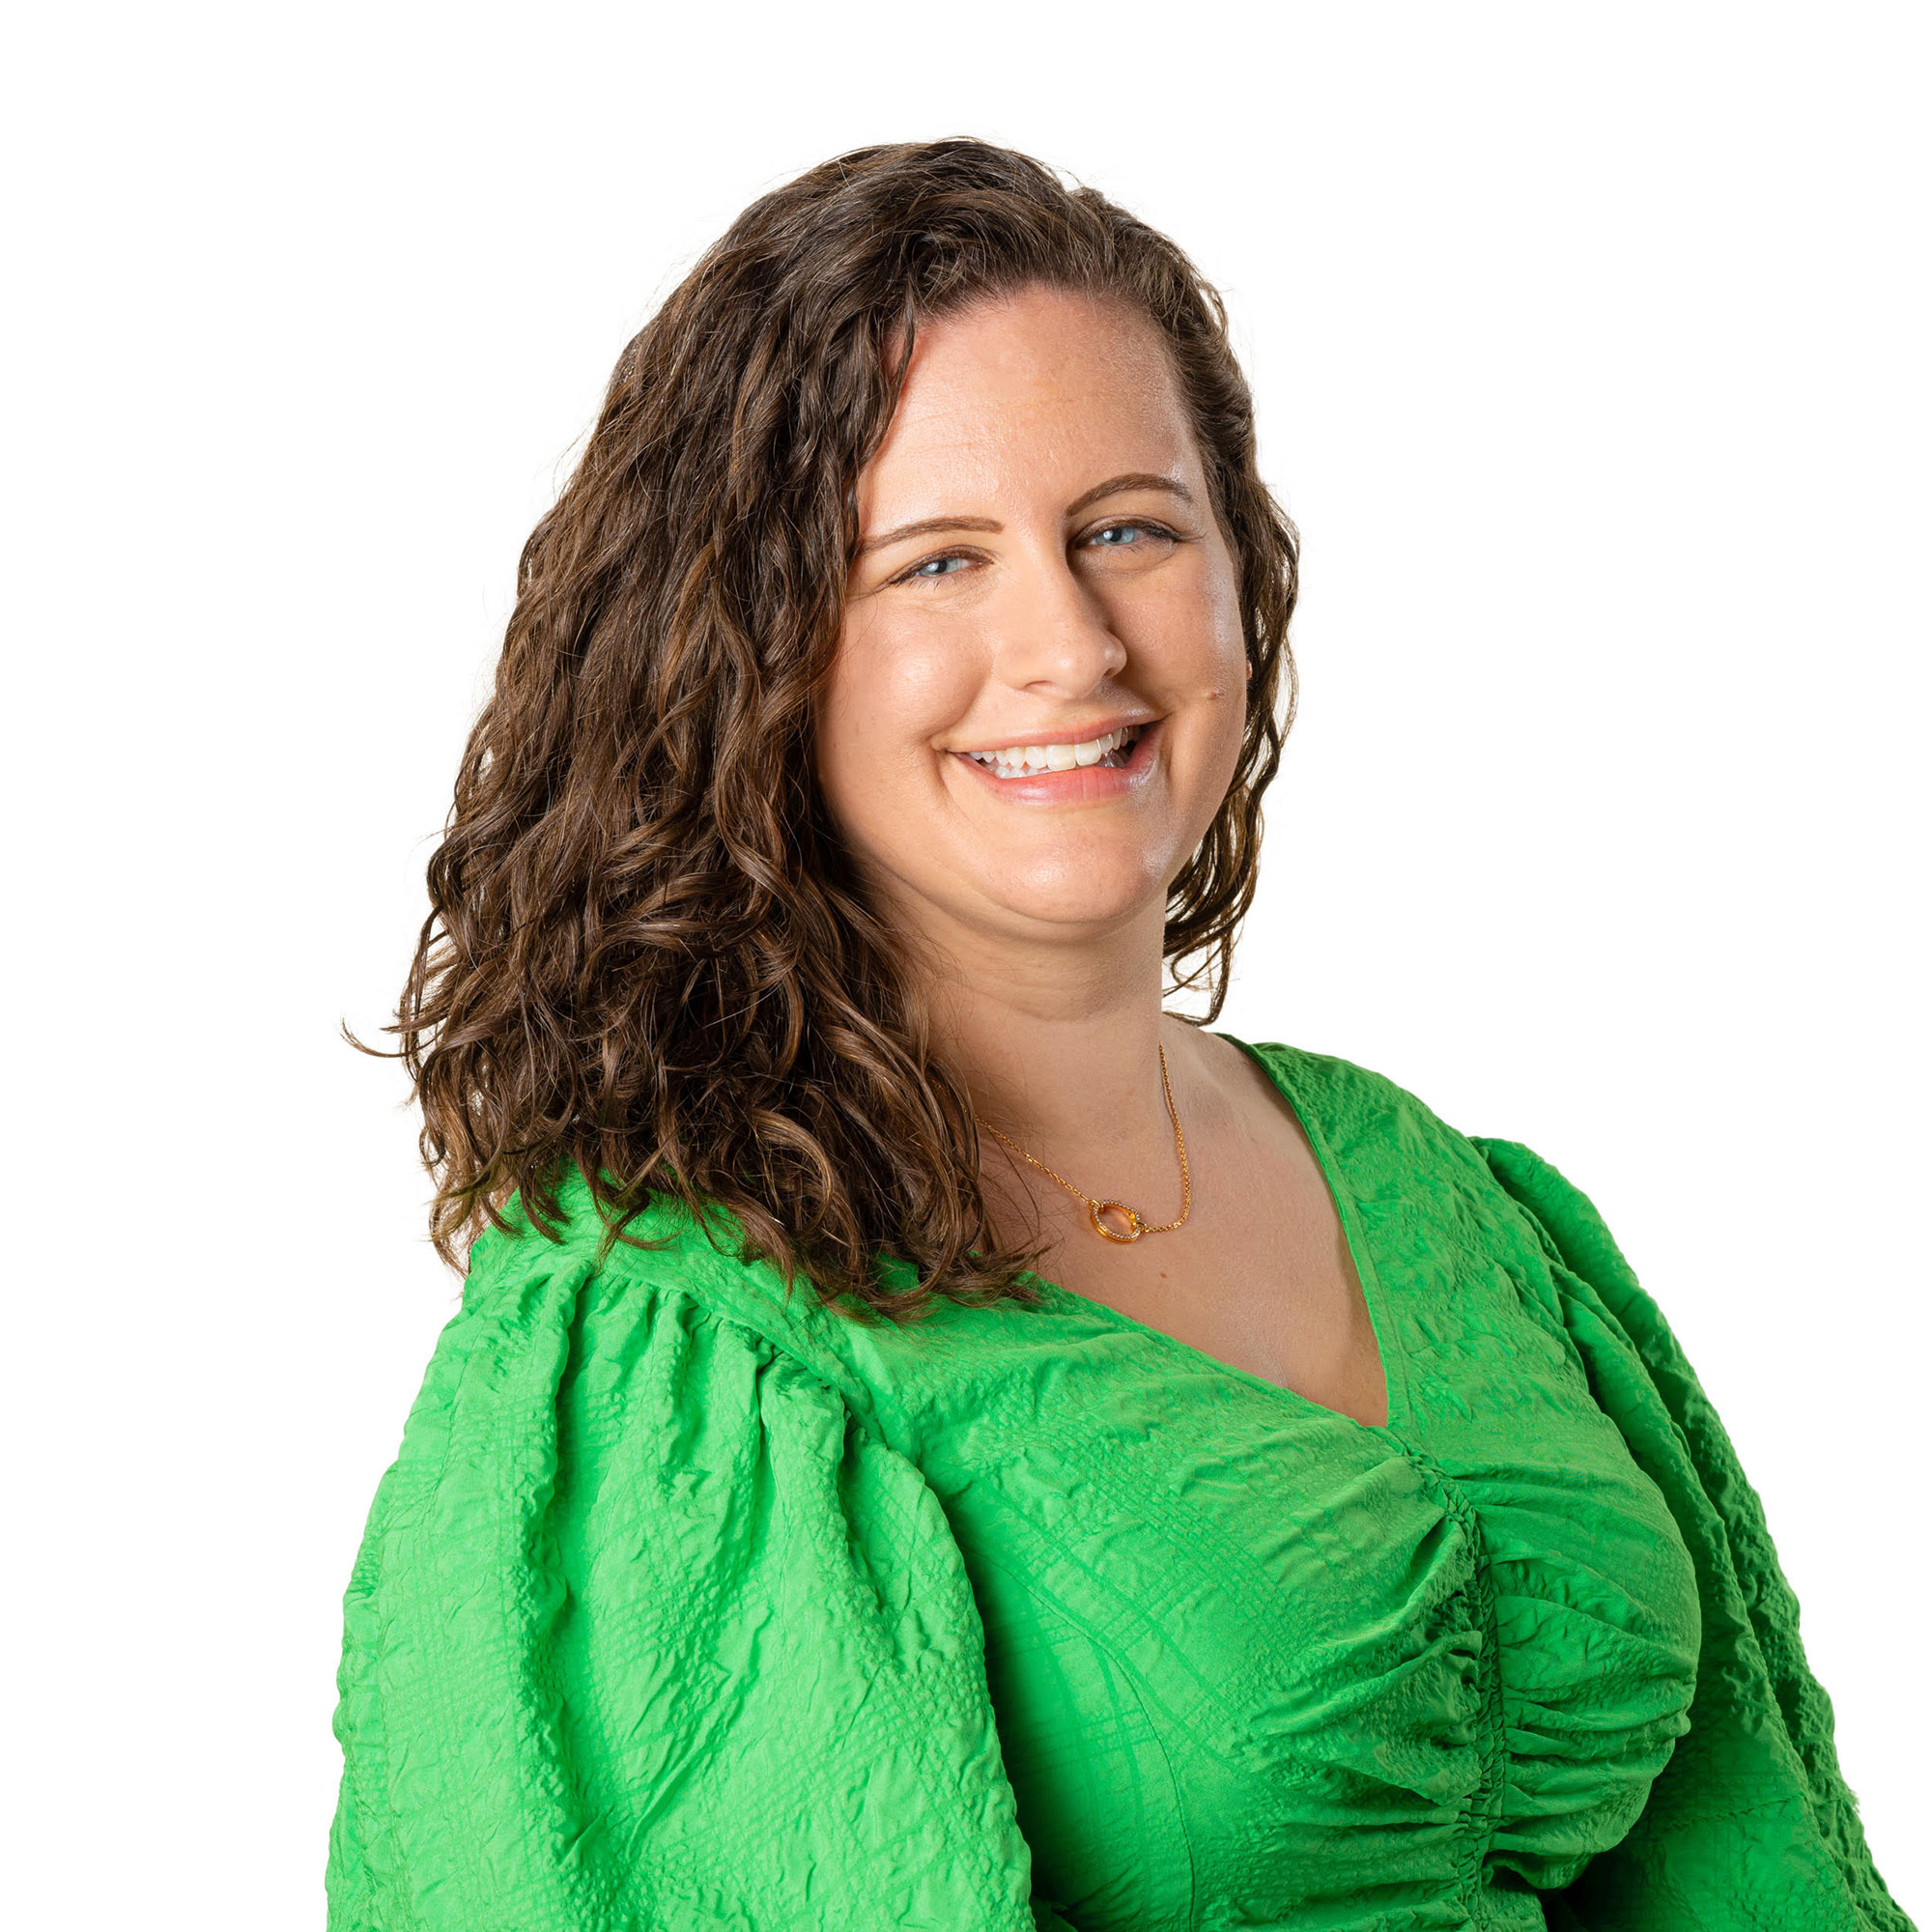 White woman with brown, curly hair, wearing bright green shirt and smiling with white background is Hannah Yang, Founder, CEO, and licensed psychologist at Balanced Awakening